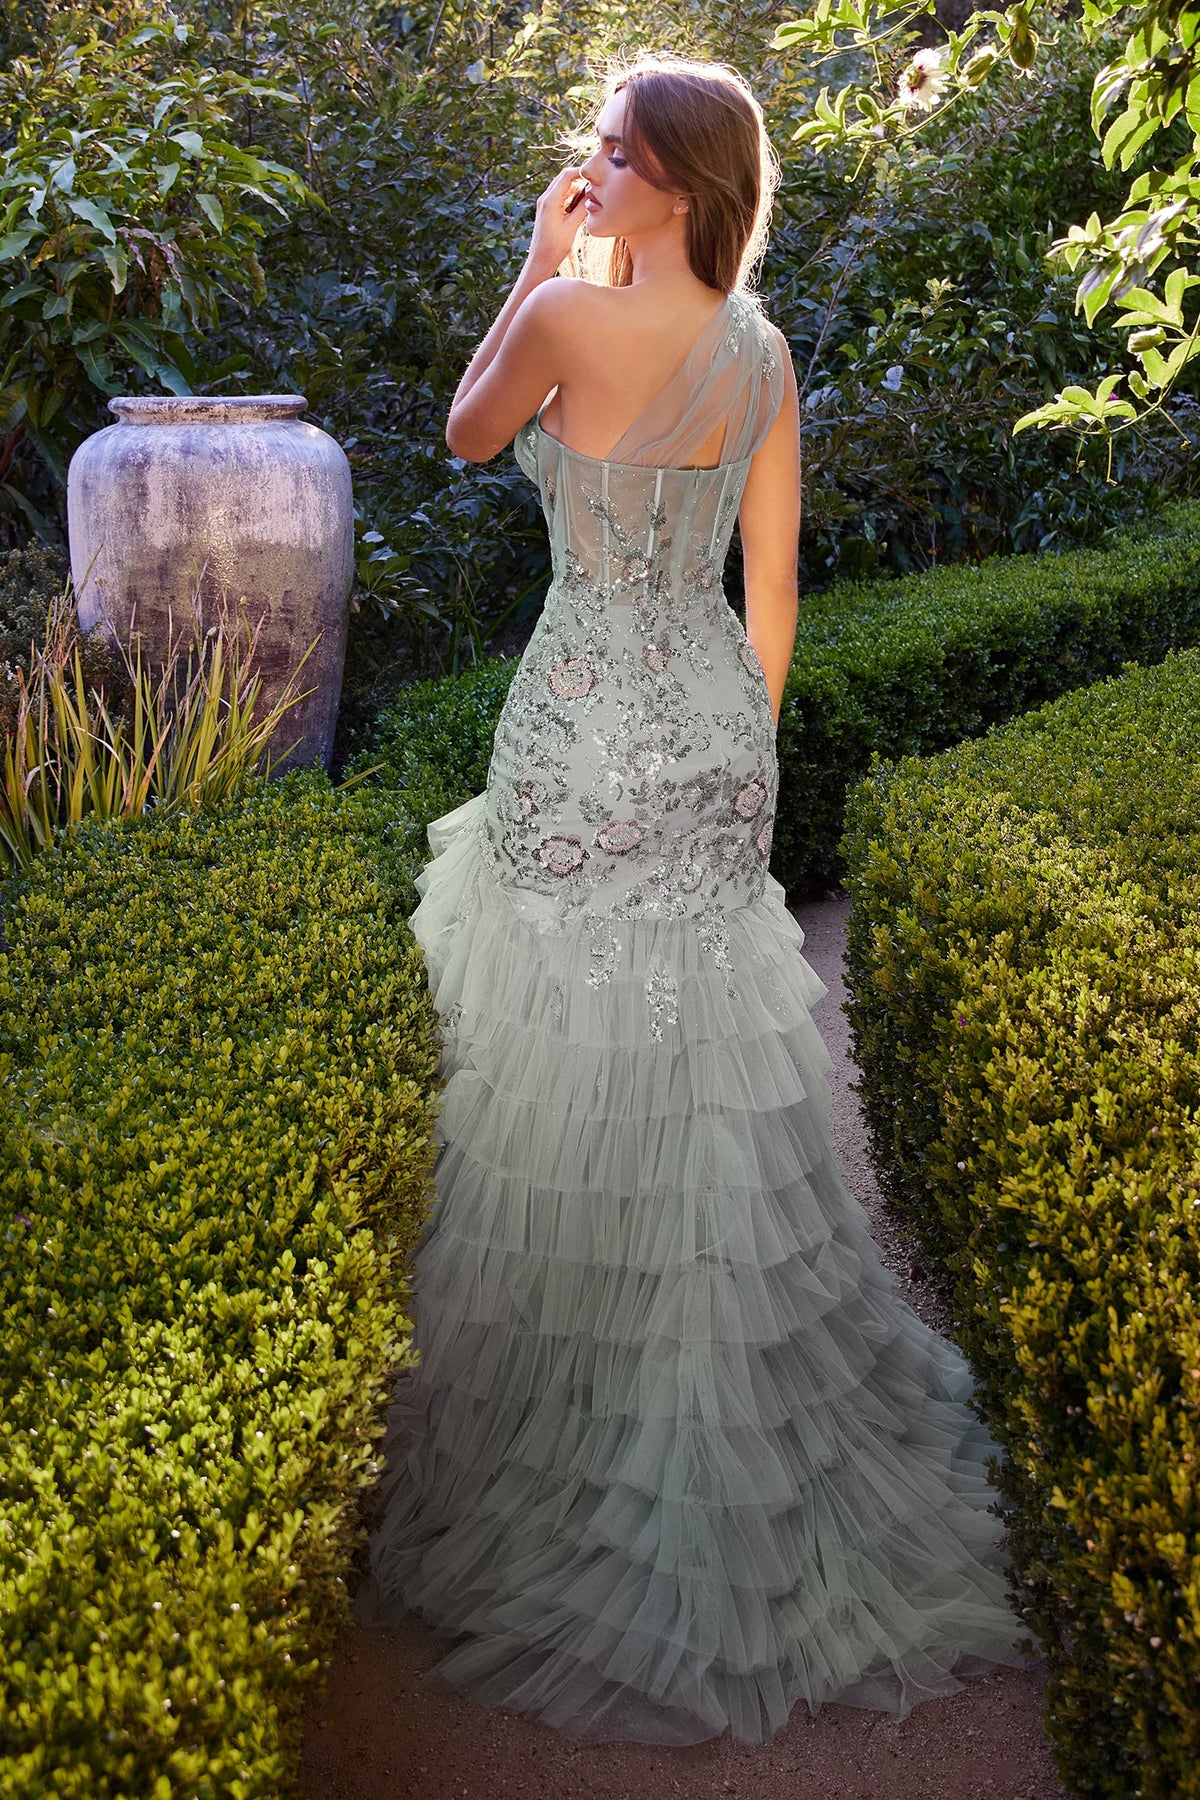 Andrea & Leo A1260 Enchanting Mermaid Prom Dress - A captivating mermaid prom dress with a sheer tulle one-shoulder strap, sequinned floral embellishments, and a tiered tulle skirt. Perfect for a magical and romantic prom night.